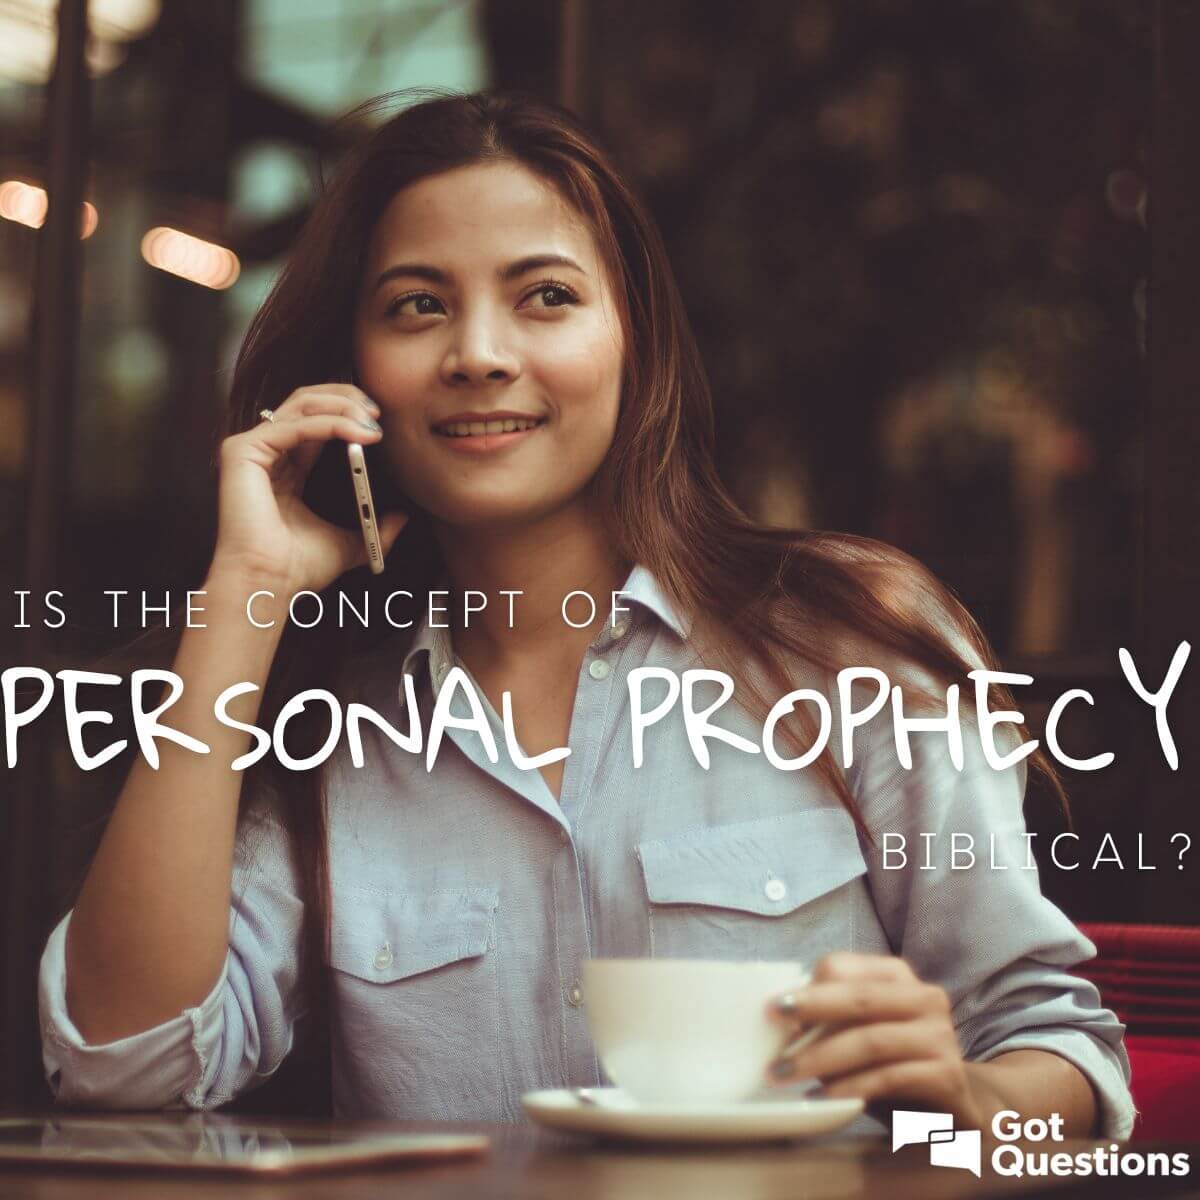 Is the concept of personal prophecy biblical?